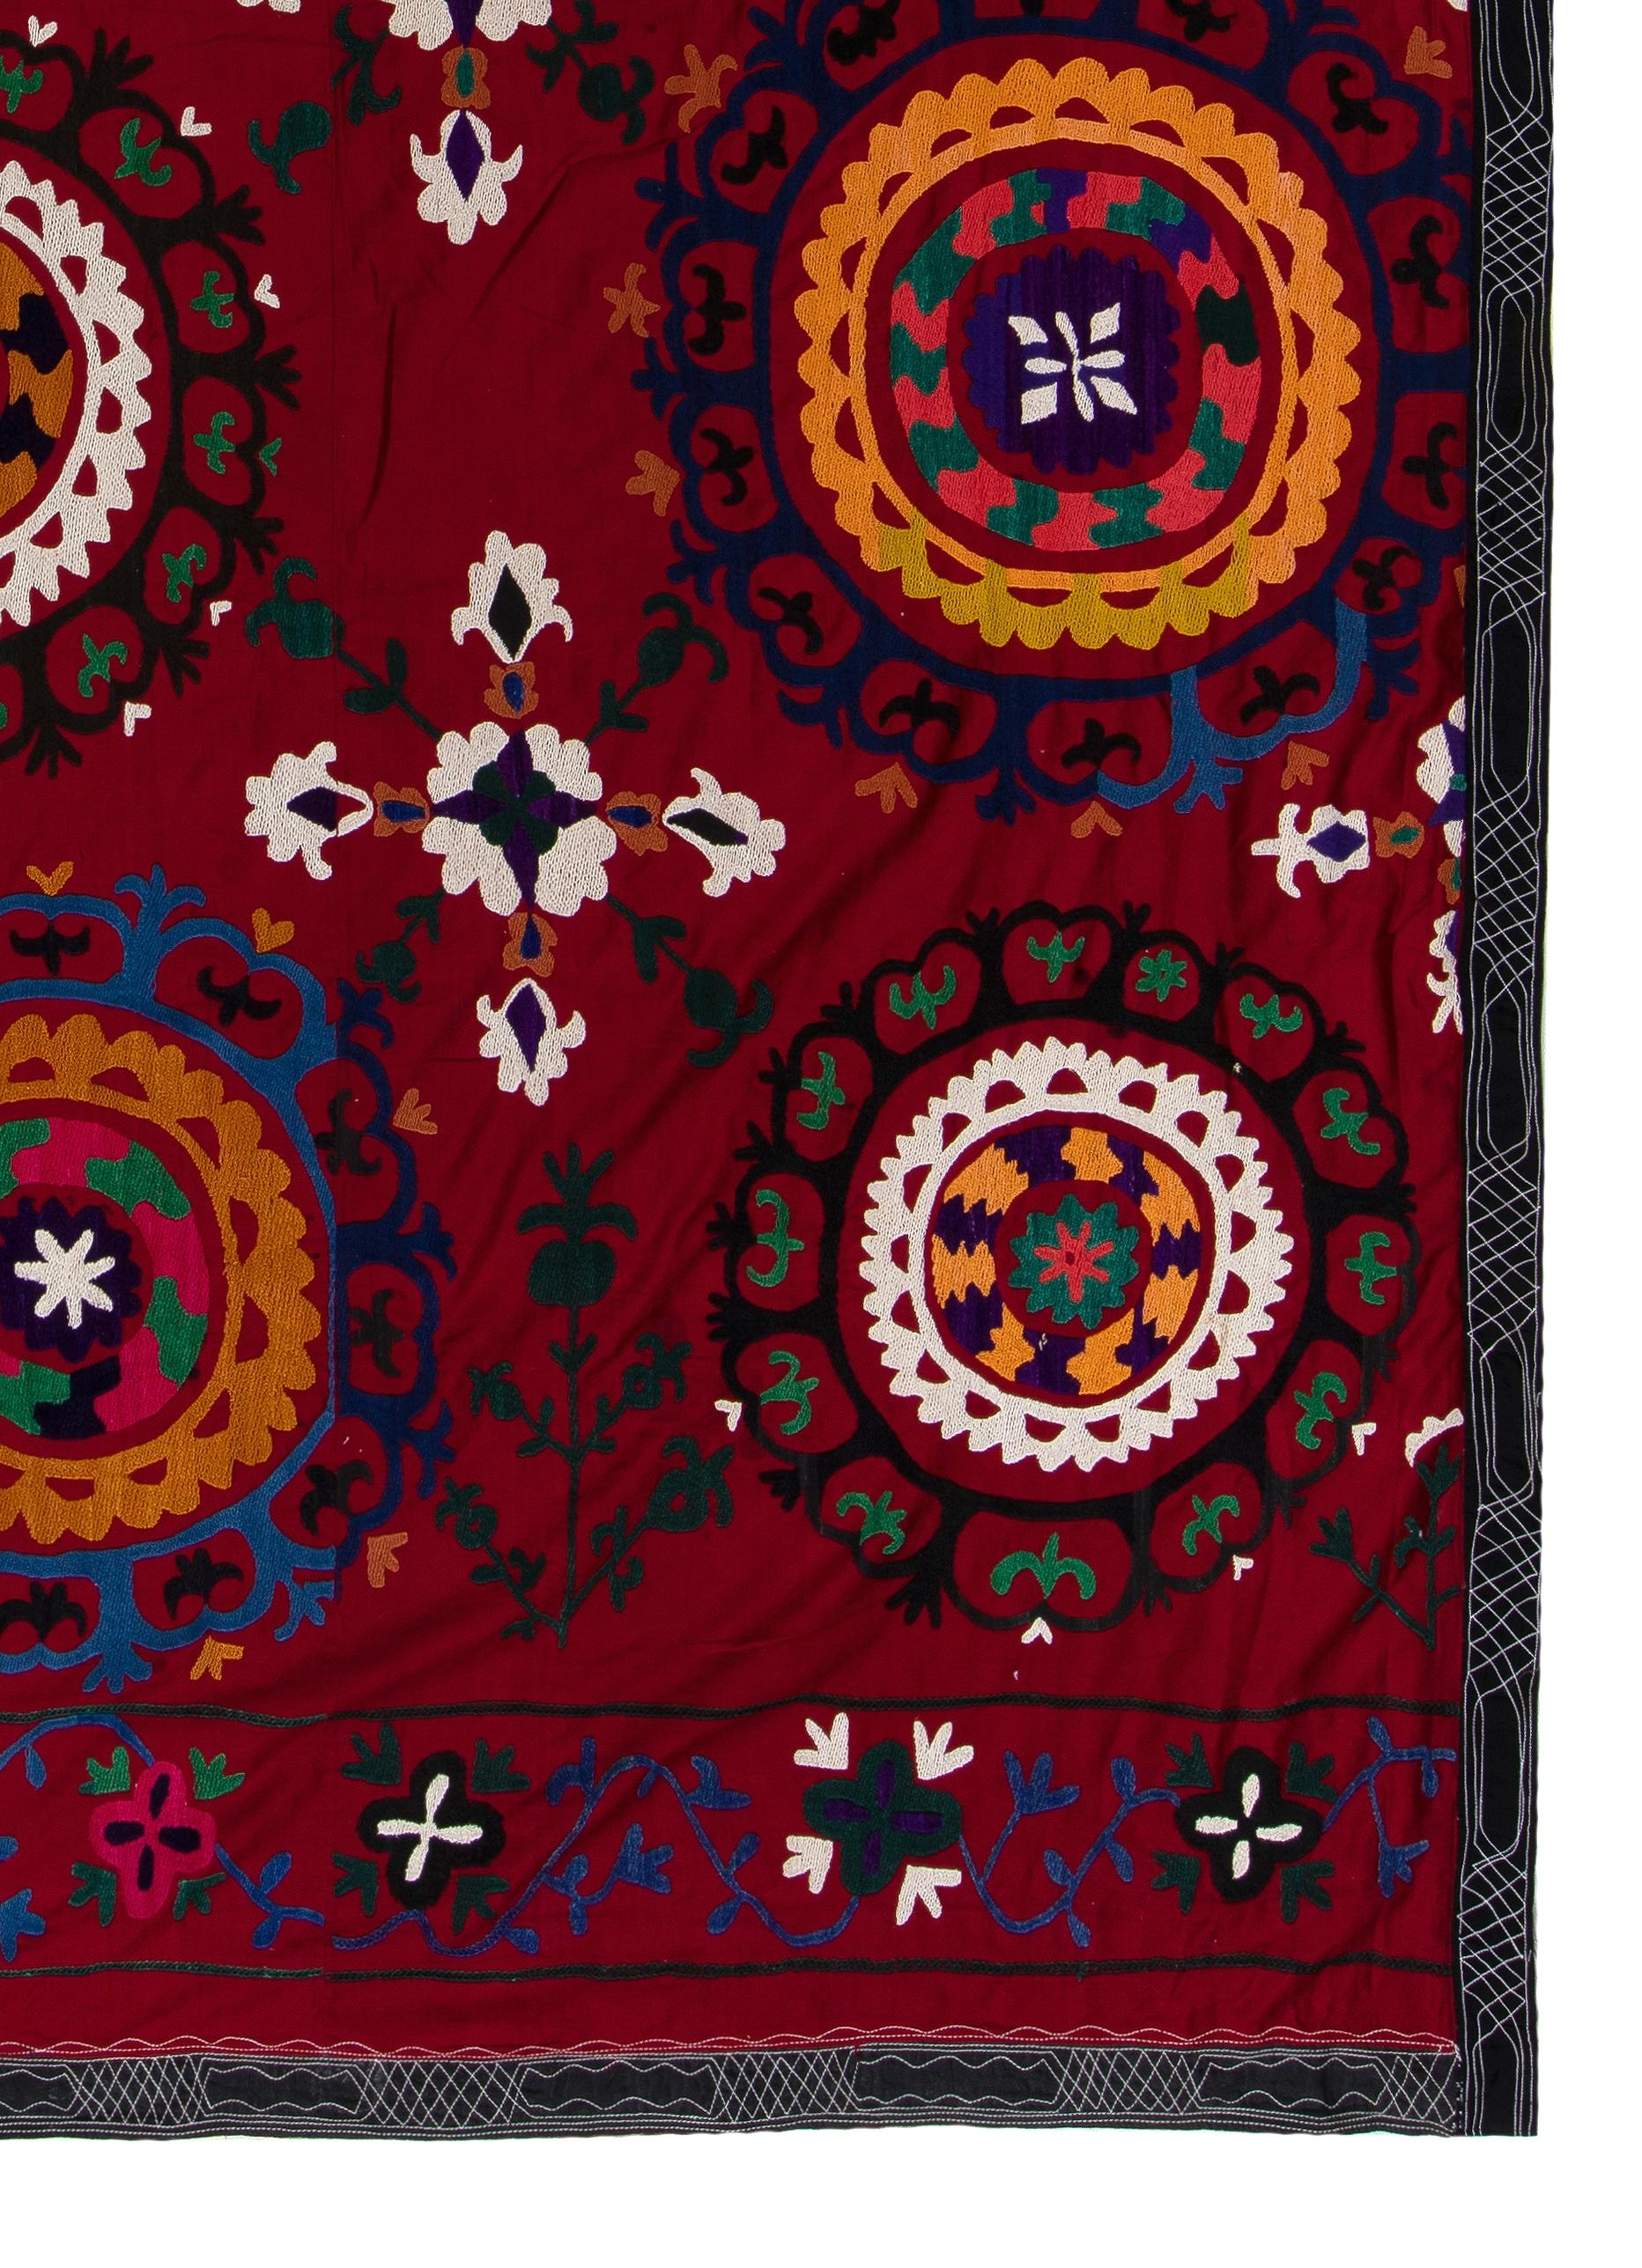 20th Century 6.4x8.4 Ft Central Asian Suzani Textile, Embroidered Cotton & Silk Wall Hanging For Sale